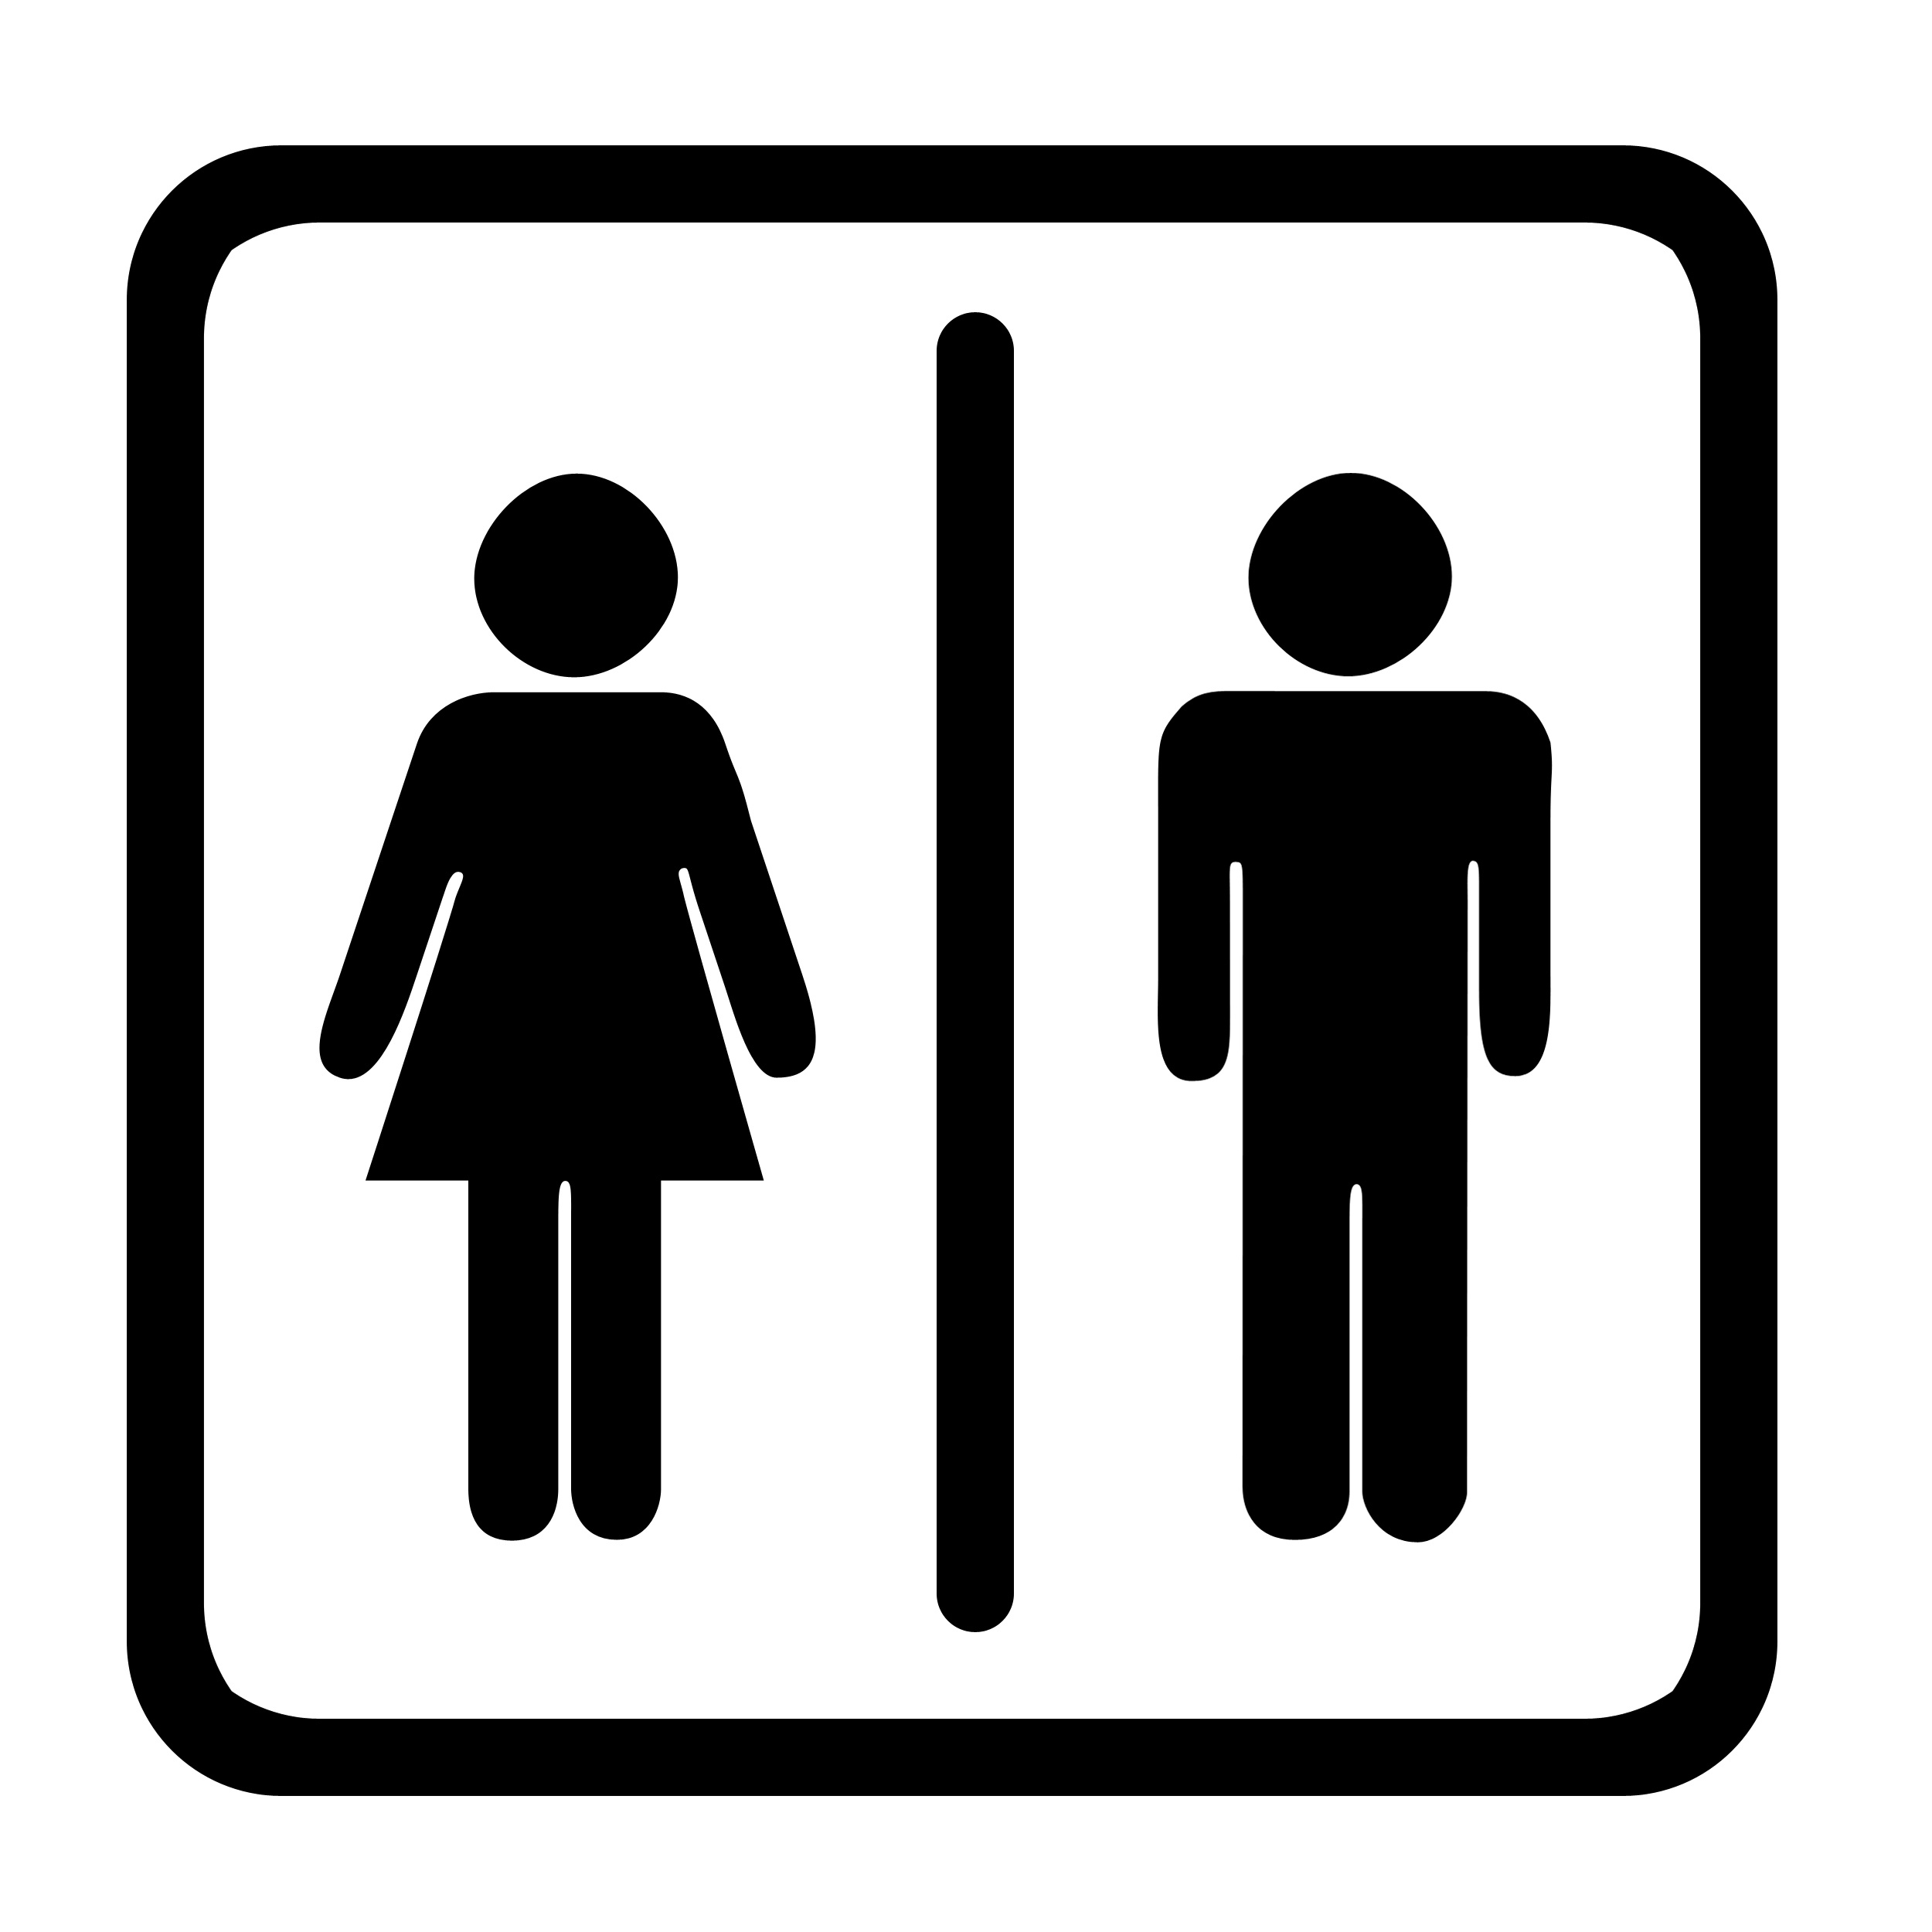 free-bathroom-signs-download-free-bathroom-signs-png-images-free